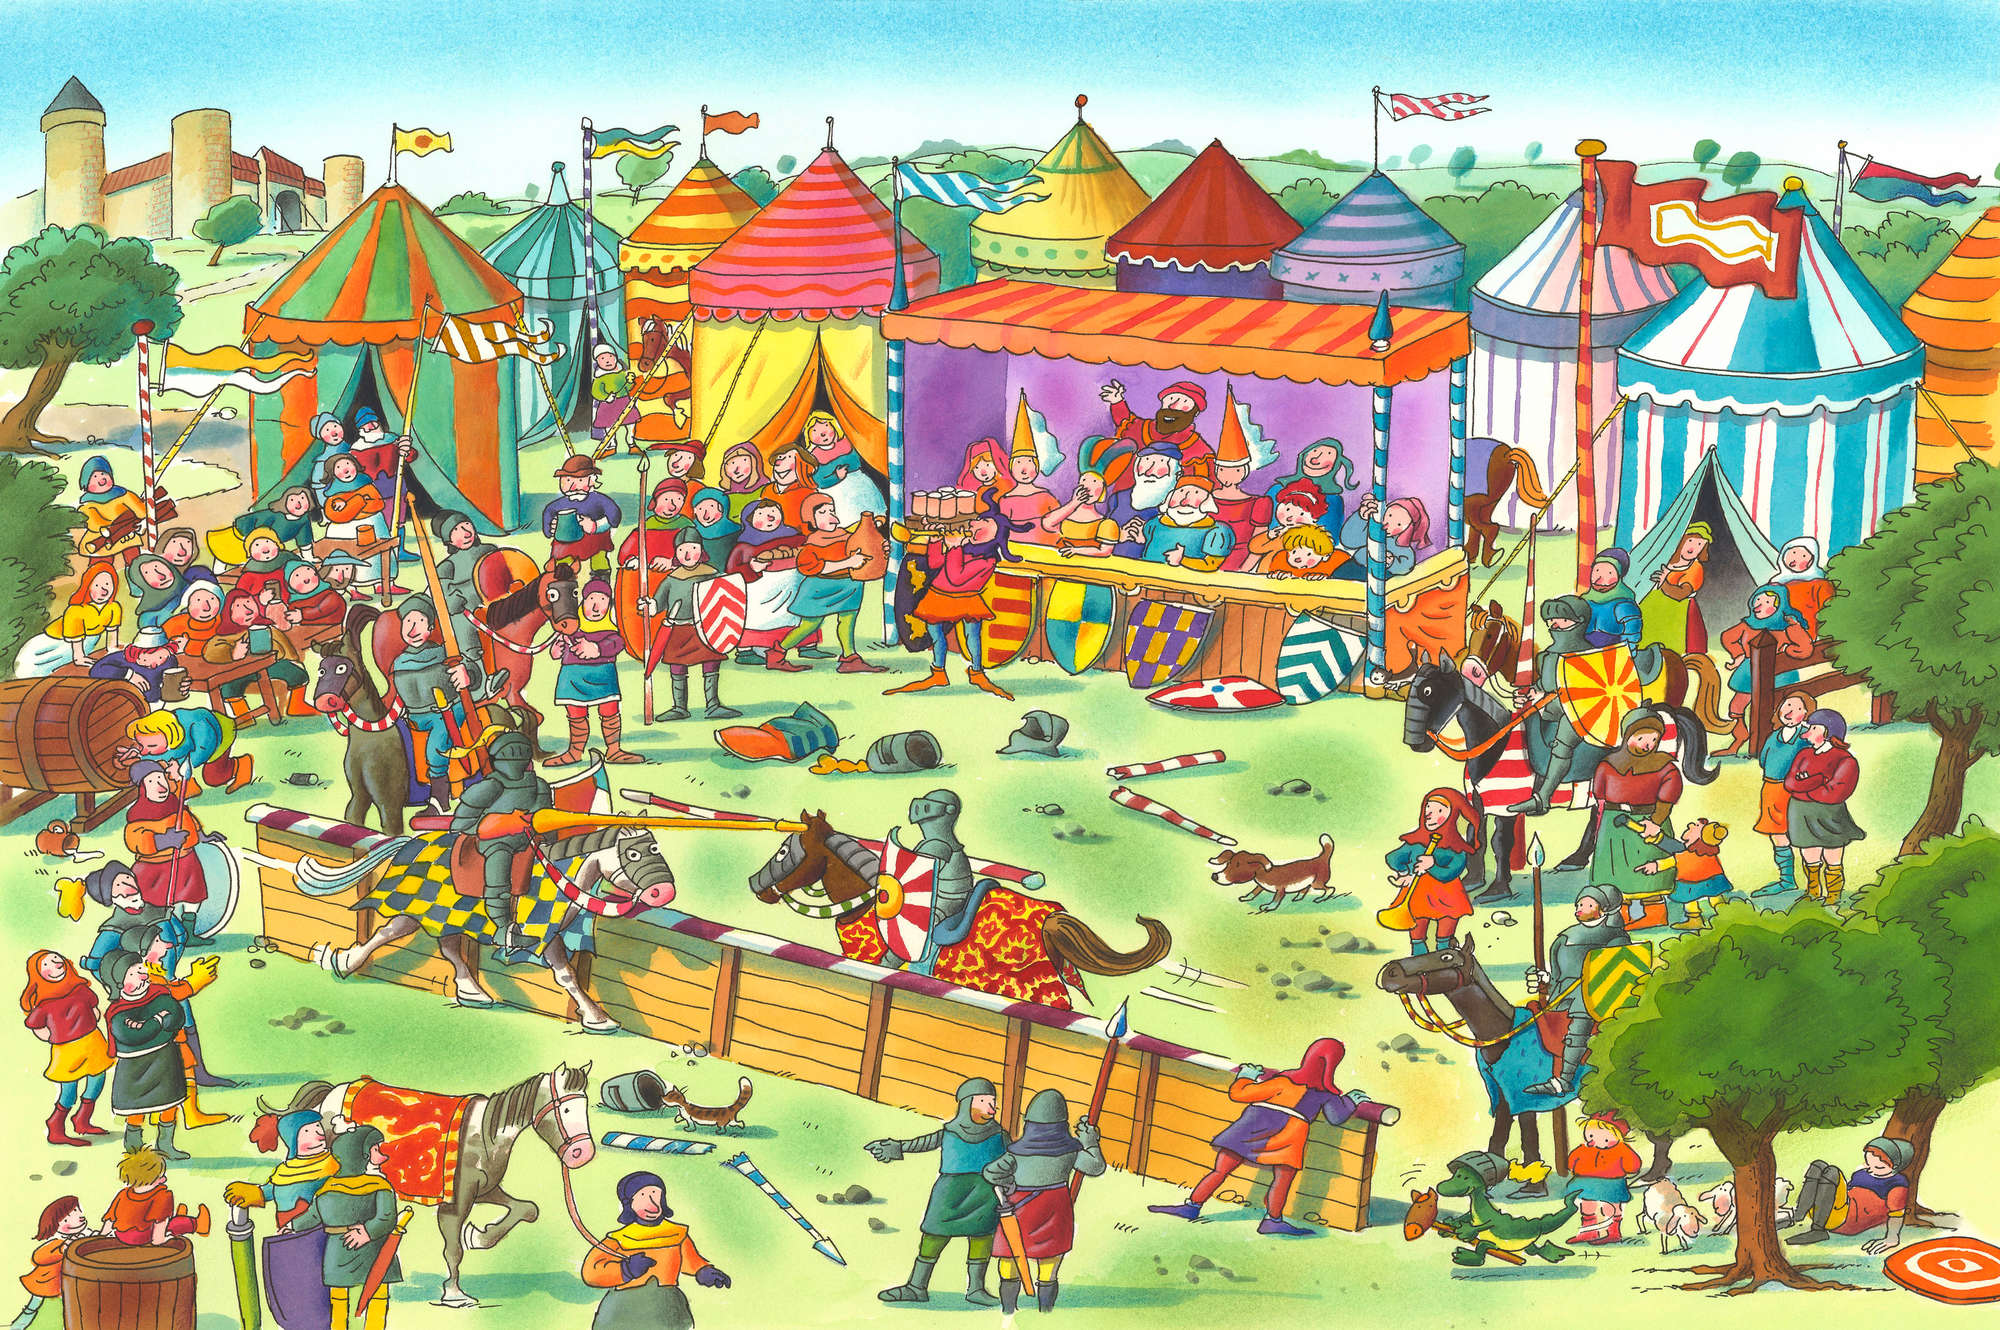             Children mural knights festival with festivals blue and yellow on premium smooth non-woven
        